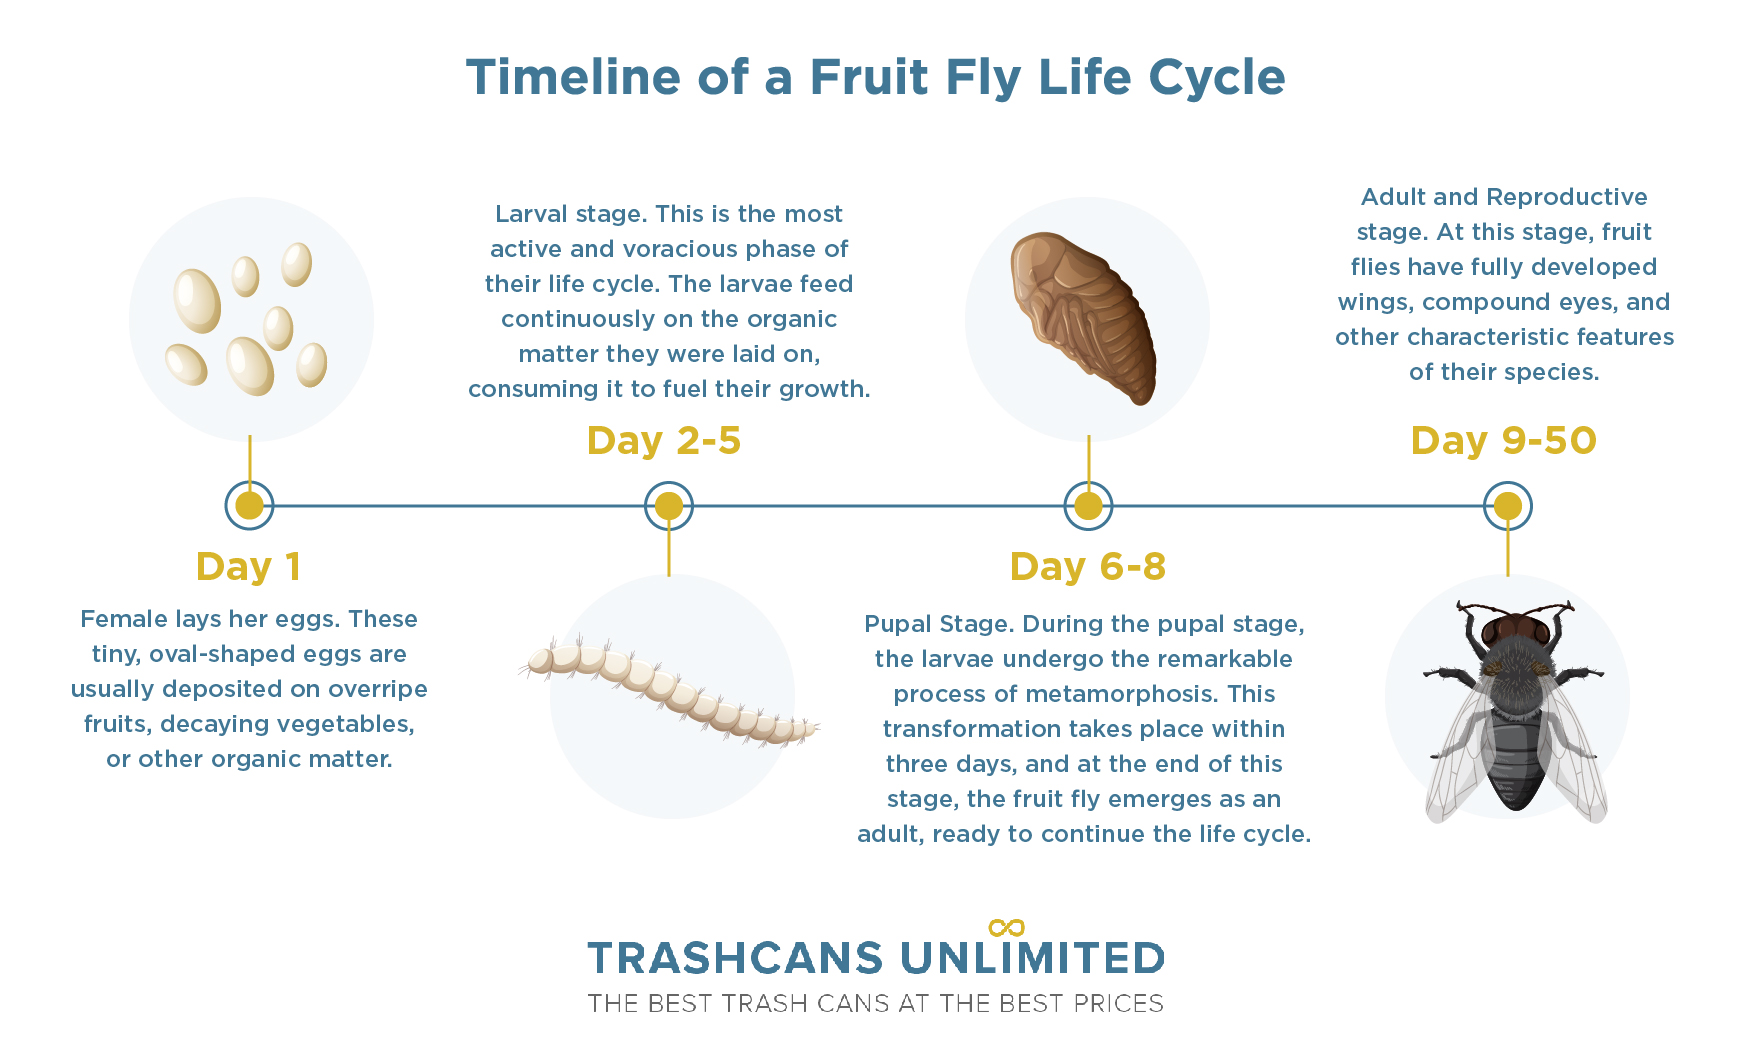 Timeline of a Fruit Fly Life Cycle